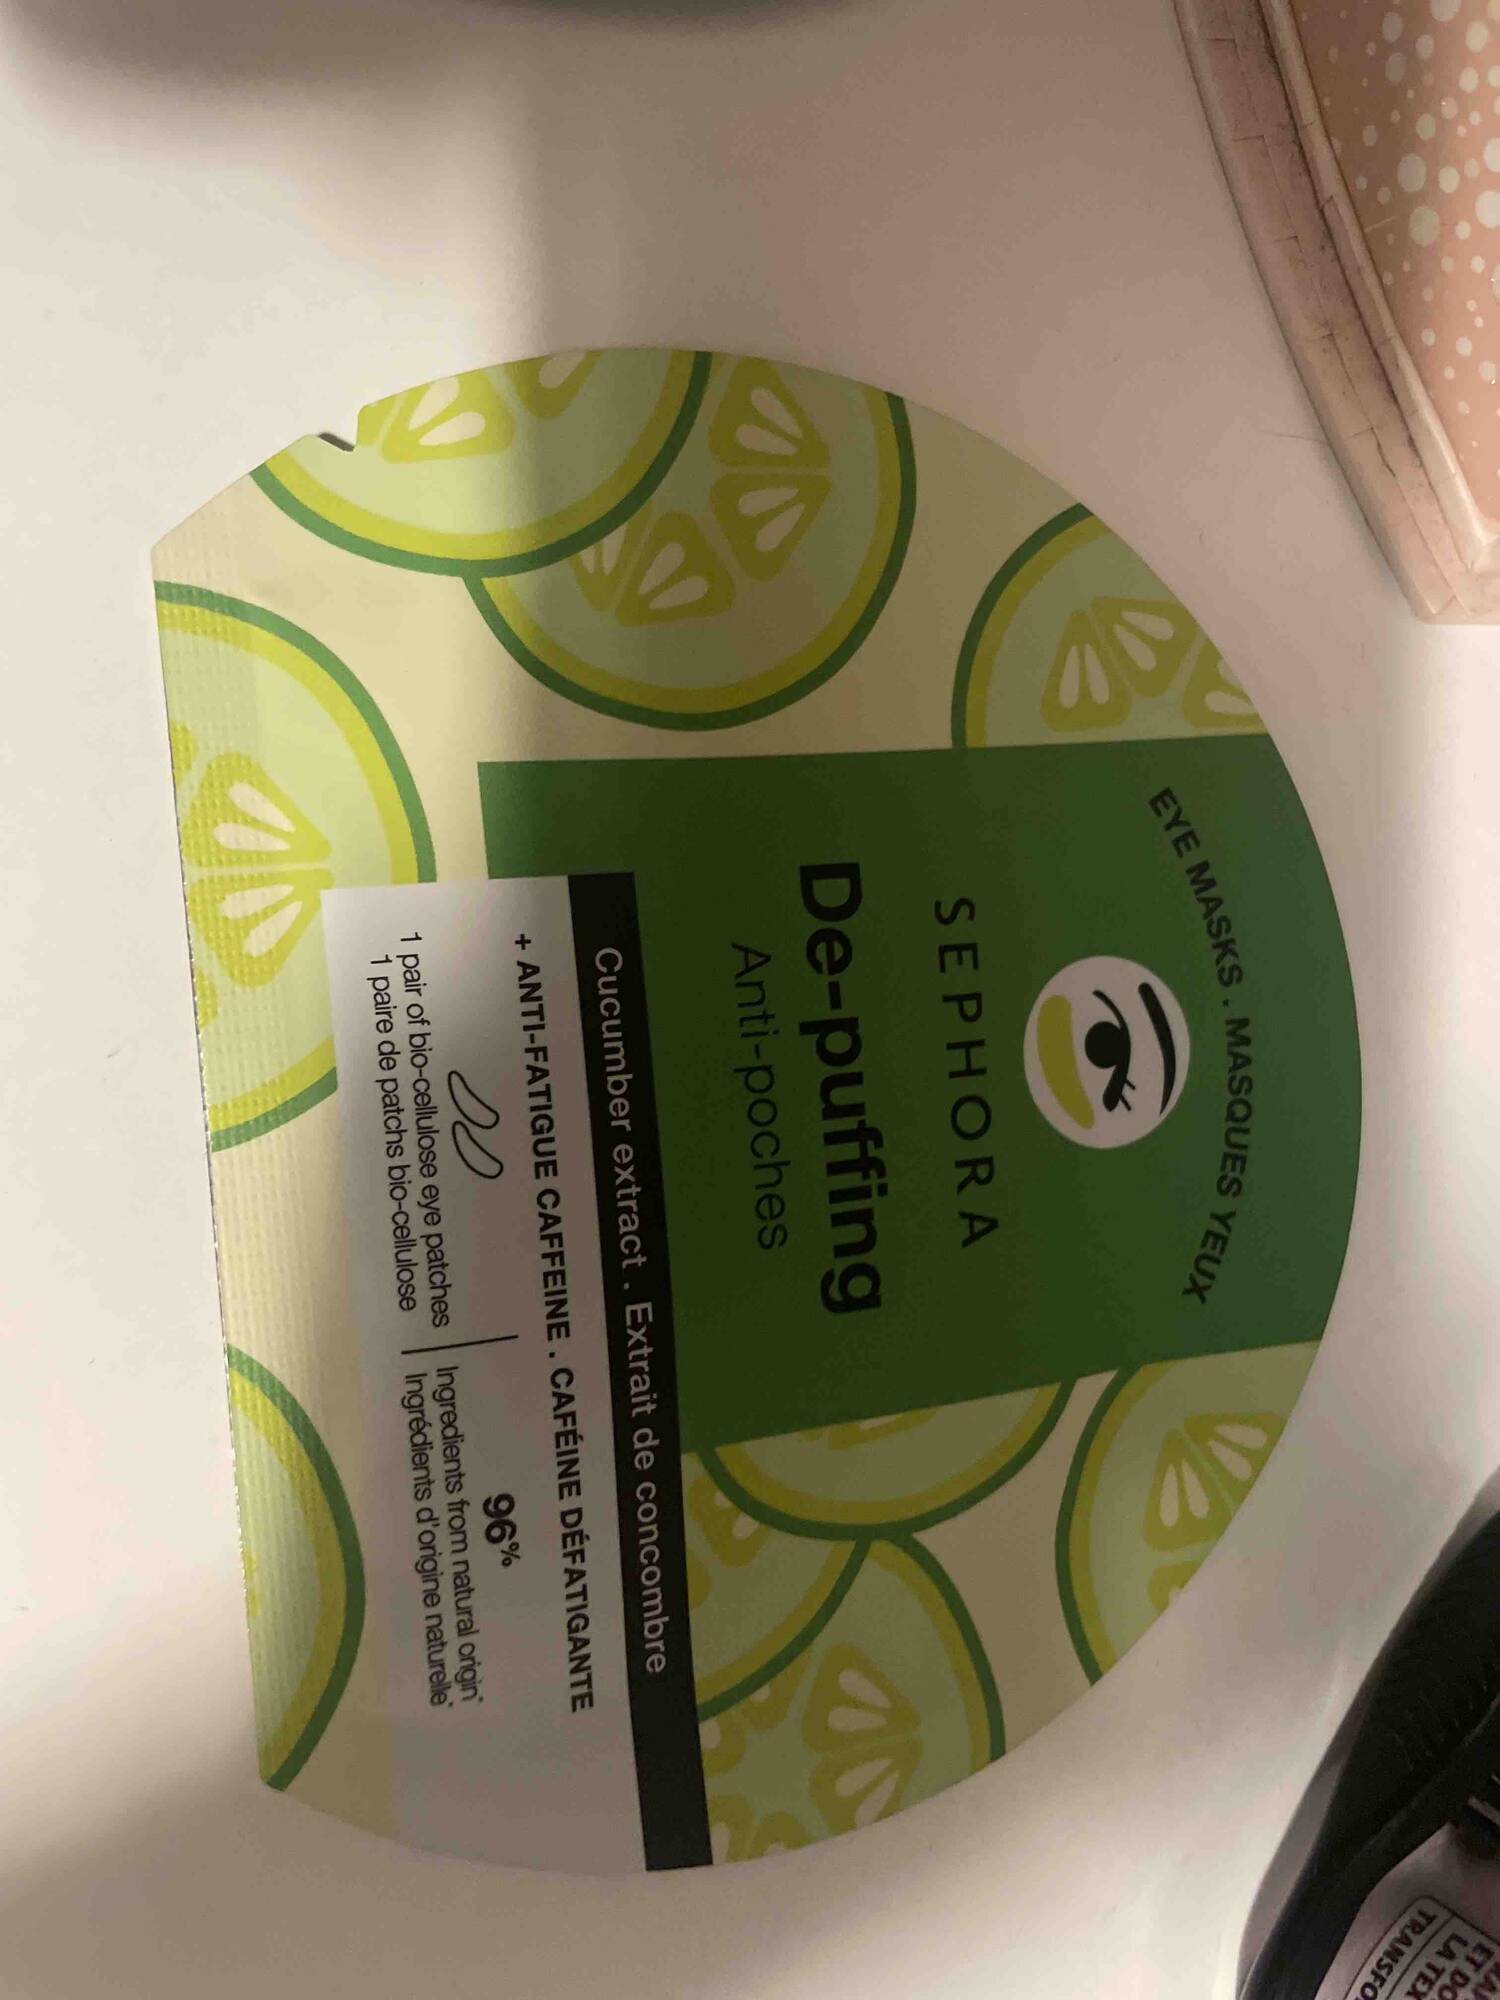 SEPHORA - De-puffing - Masques yeux anti-poches